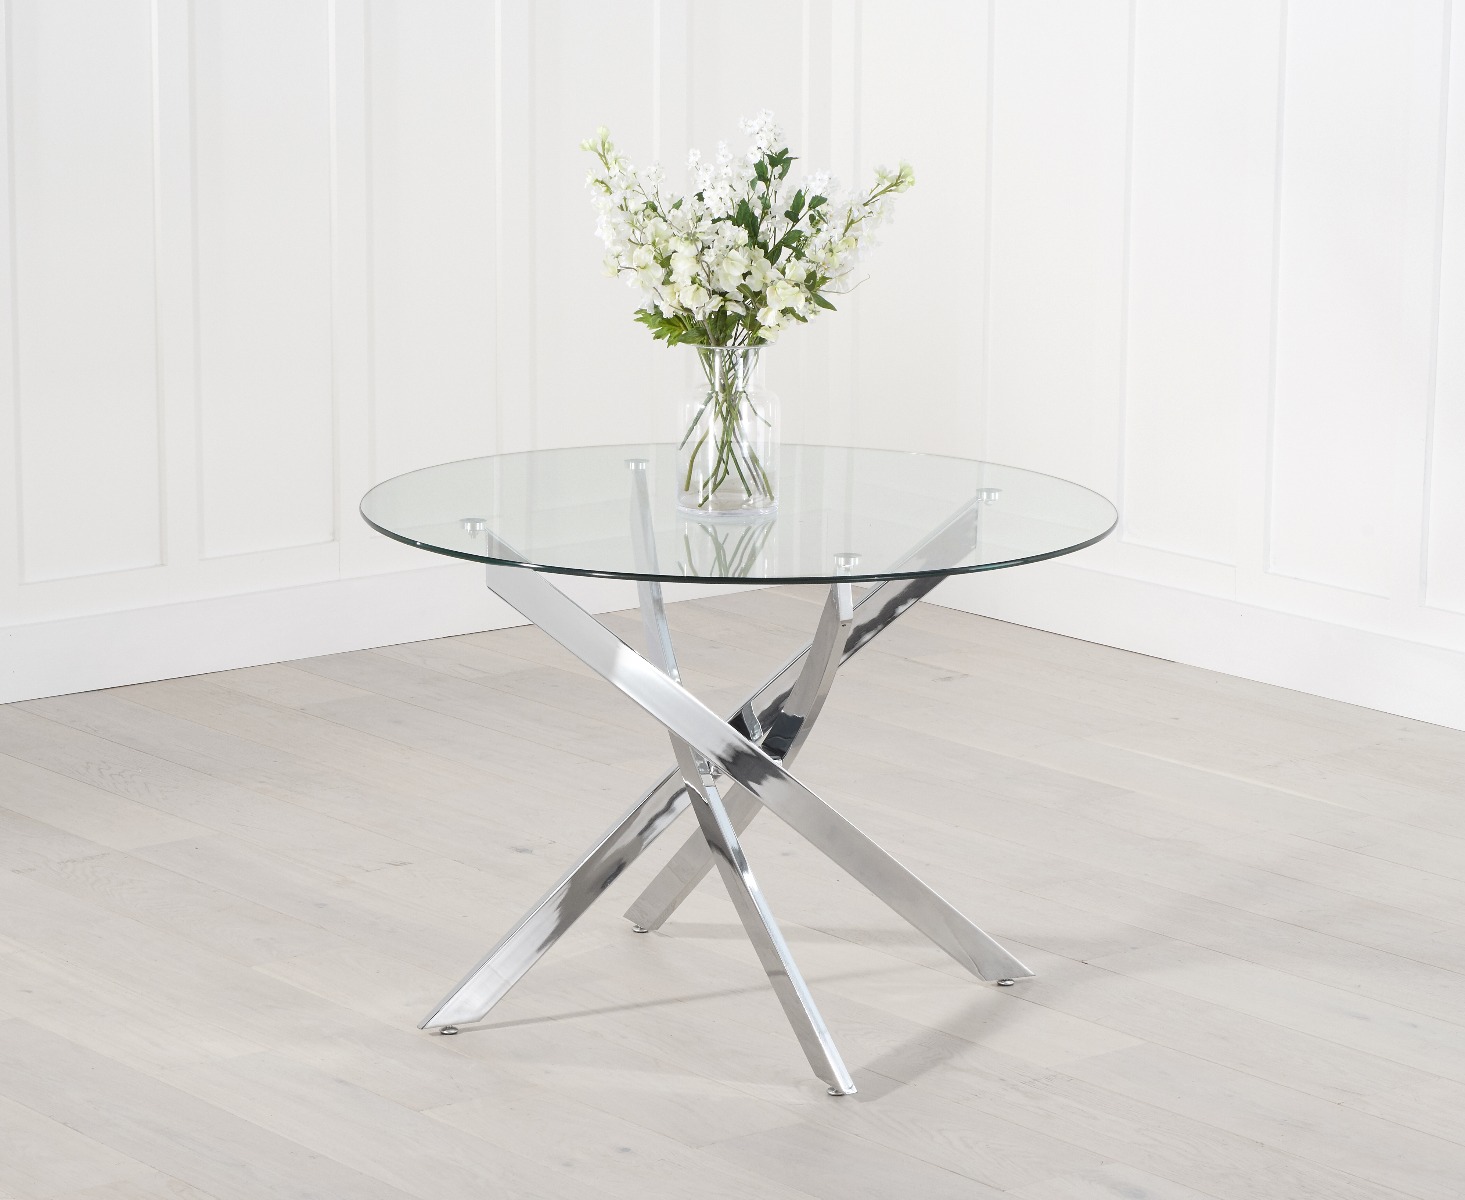 Photo 5 of Denver 120cm glass dining table with 6 grey vigo chairs